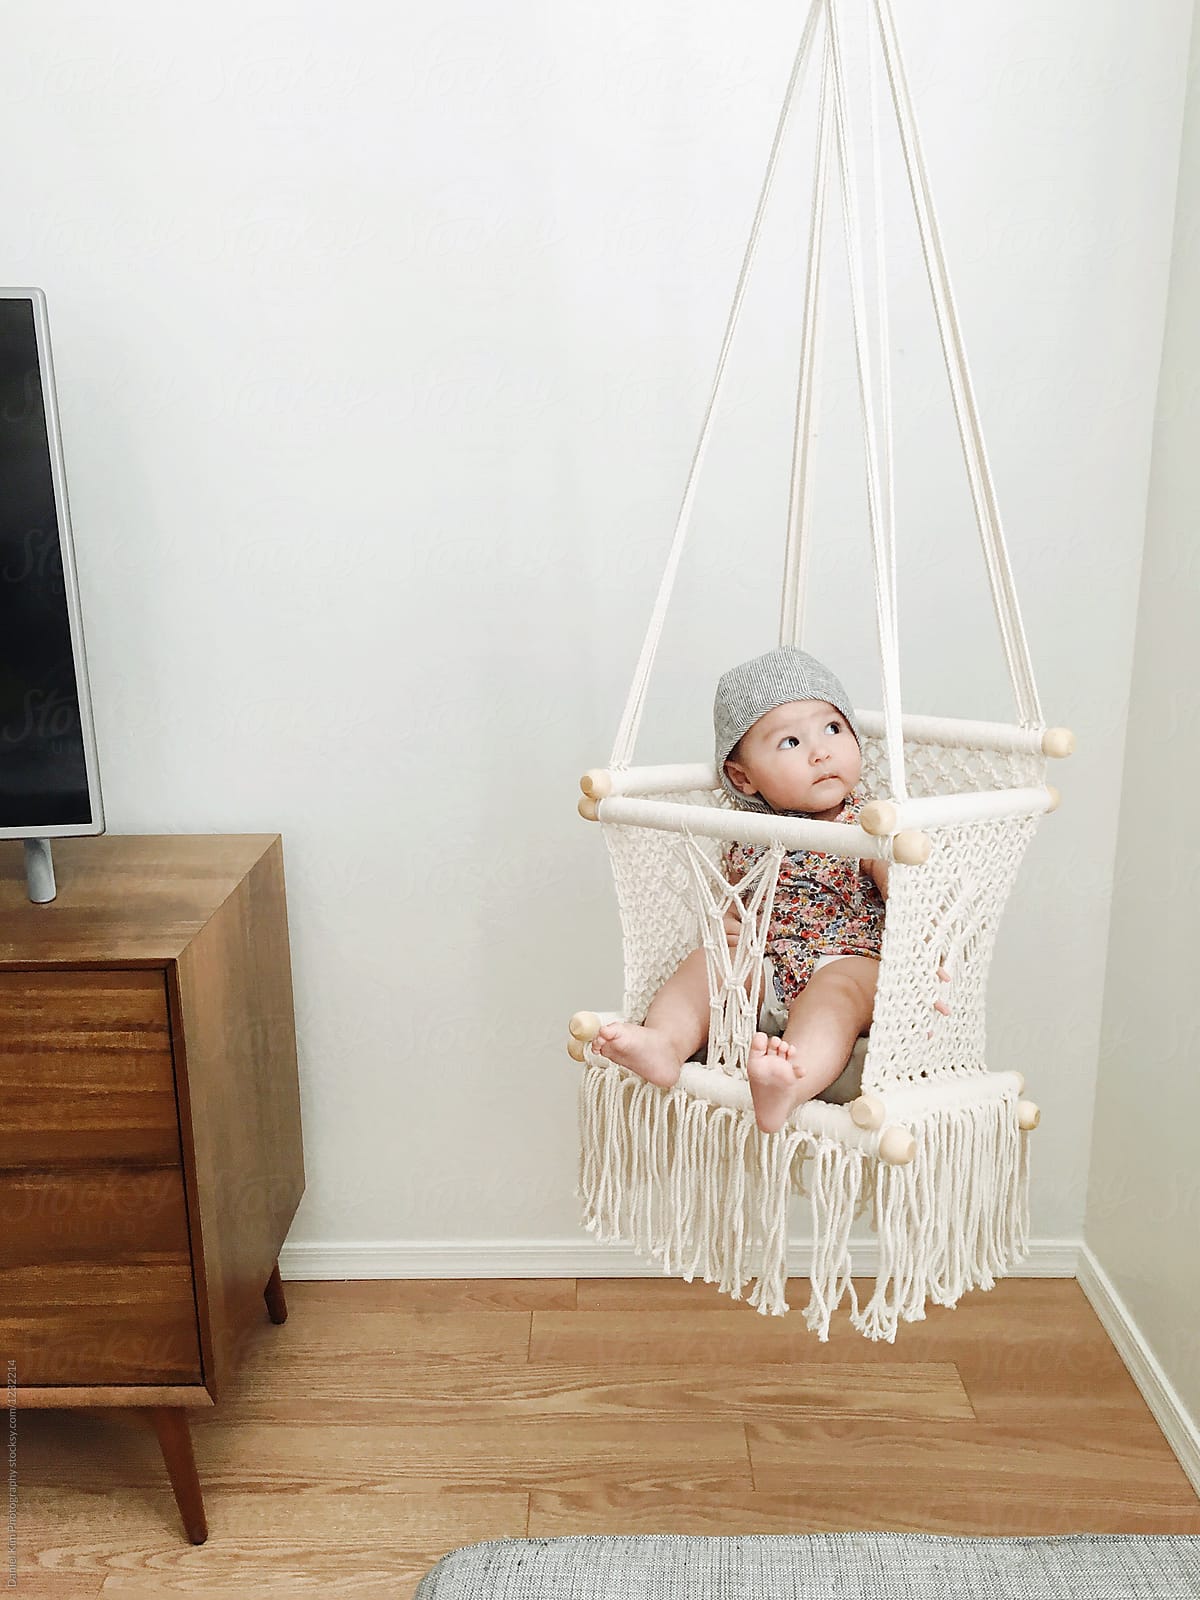 Baby Sitting In Swing Indoors By Daniel Kim Photography Baby